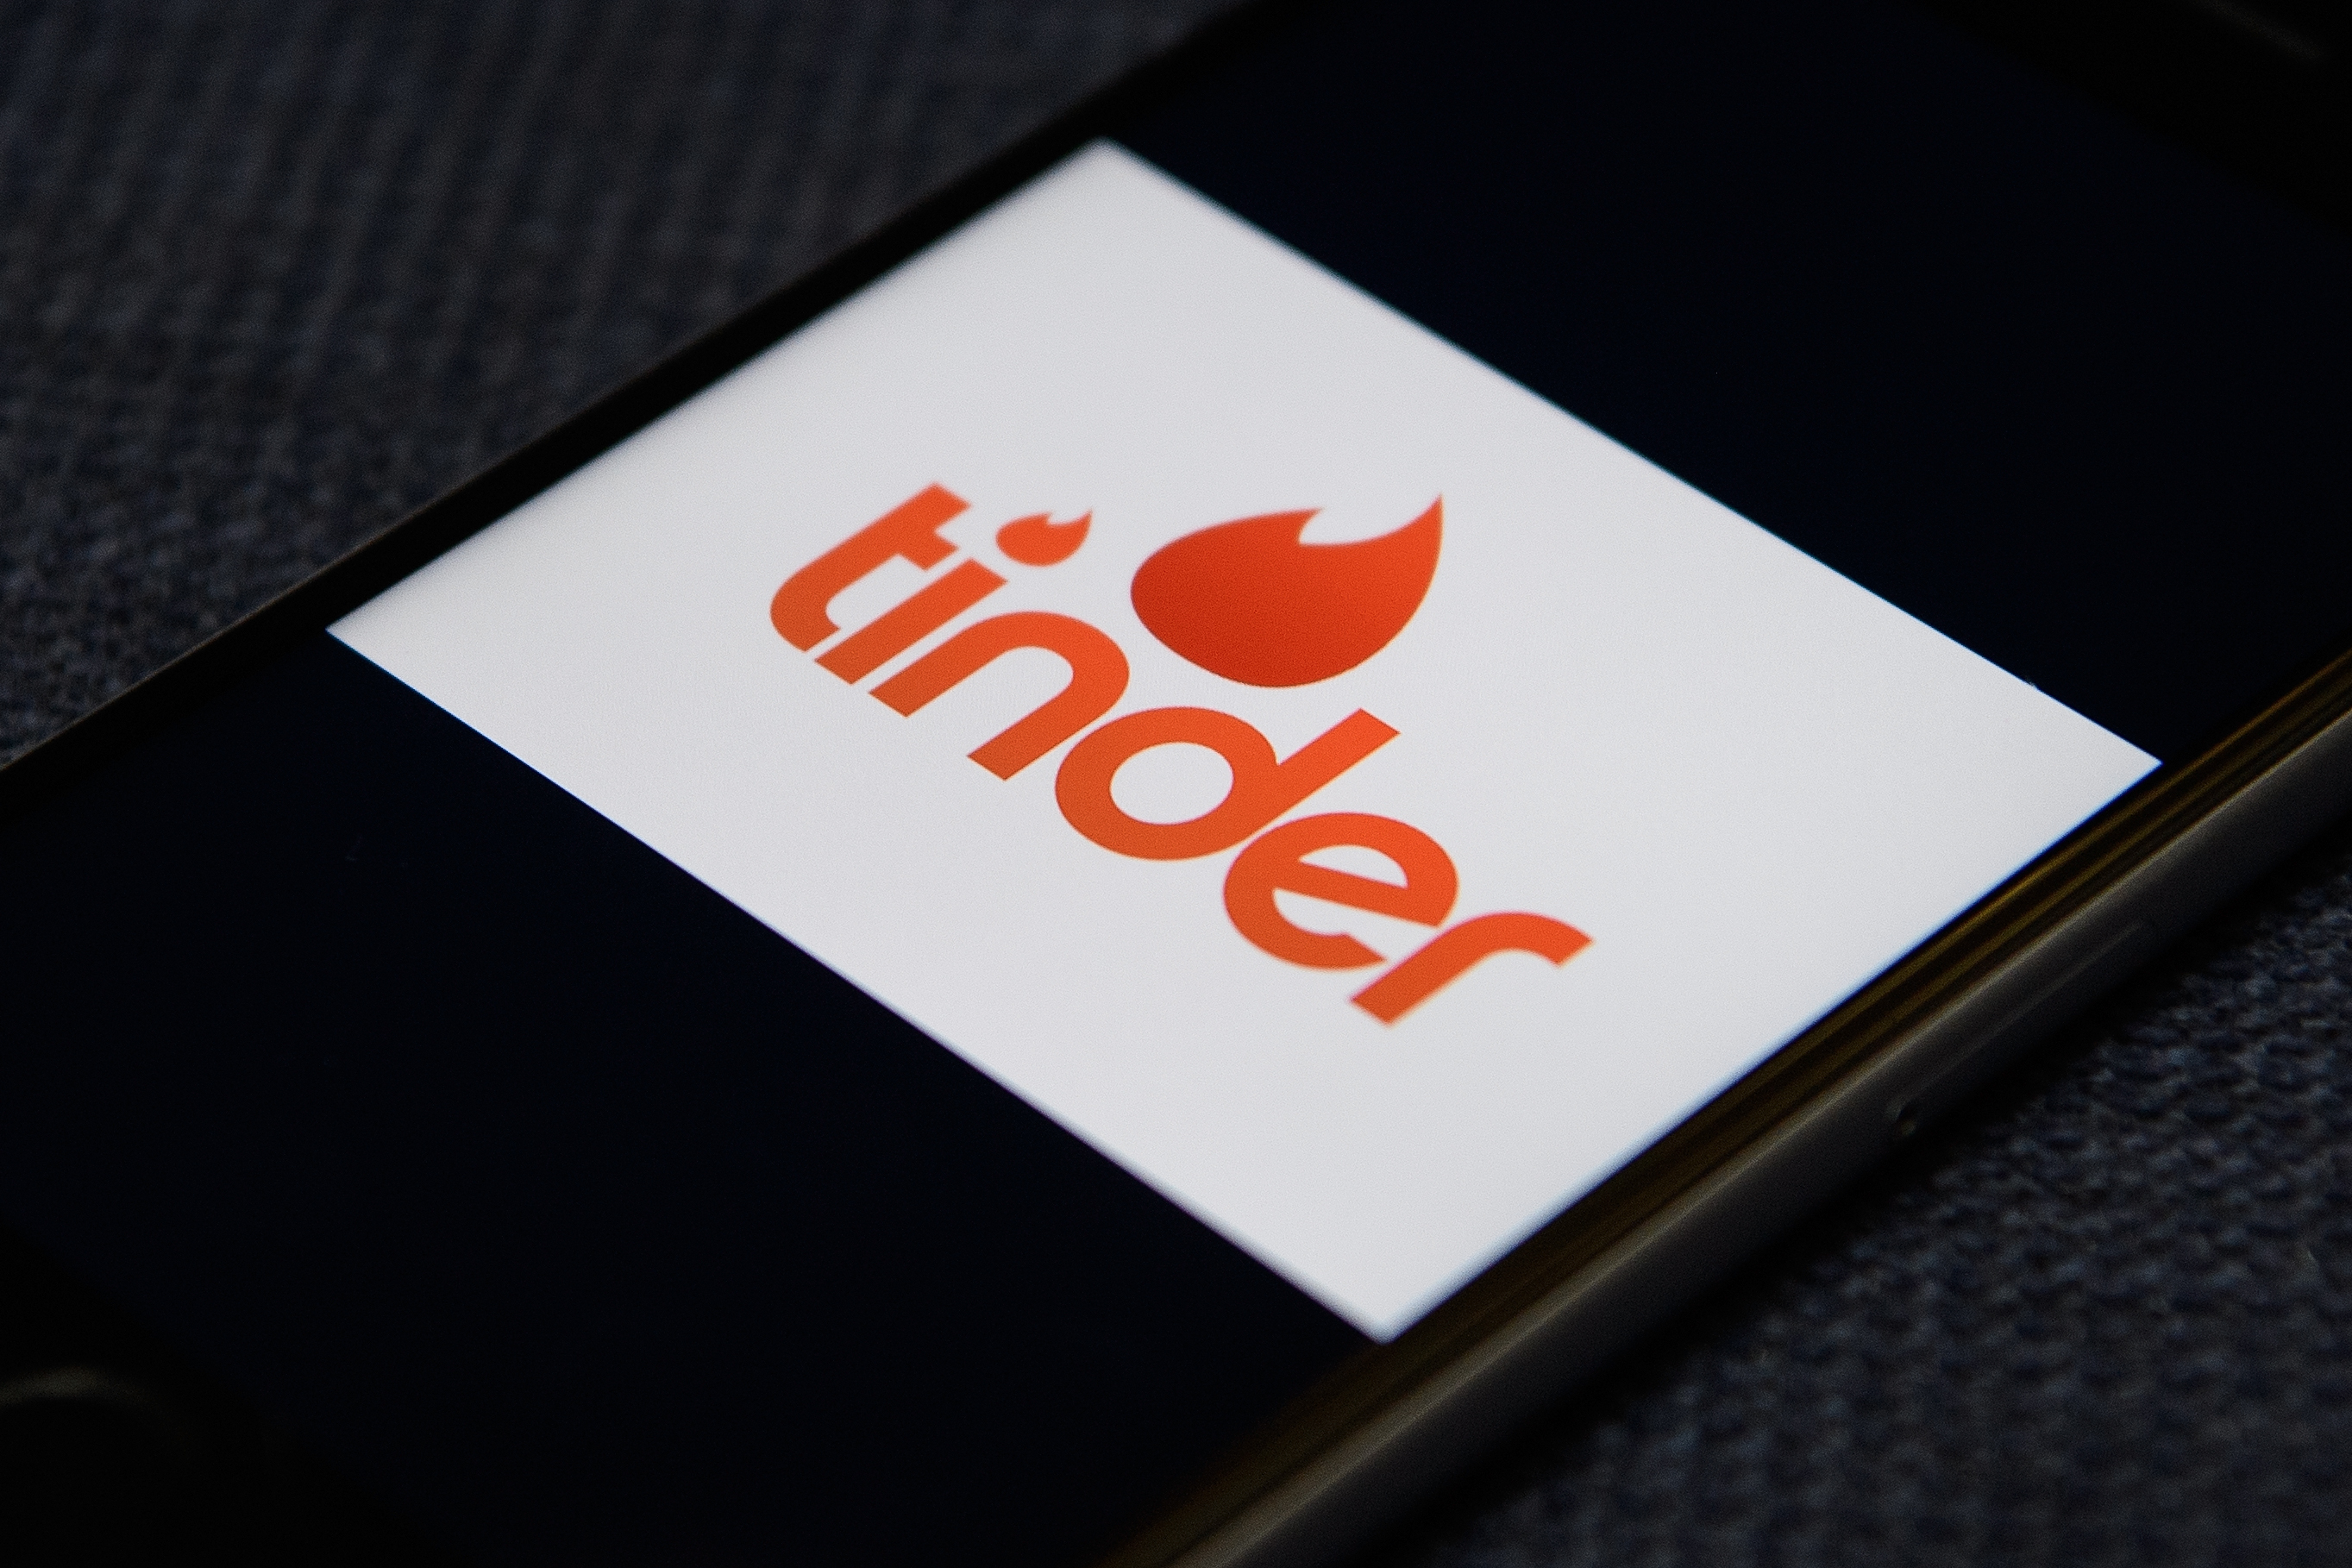 Tinder is one of the most popular tools to pursue modern romance.